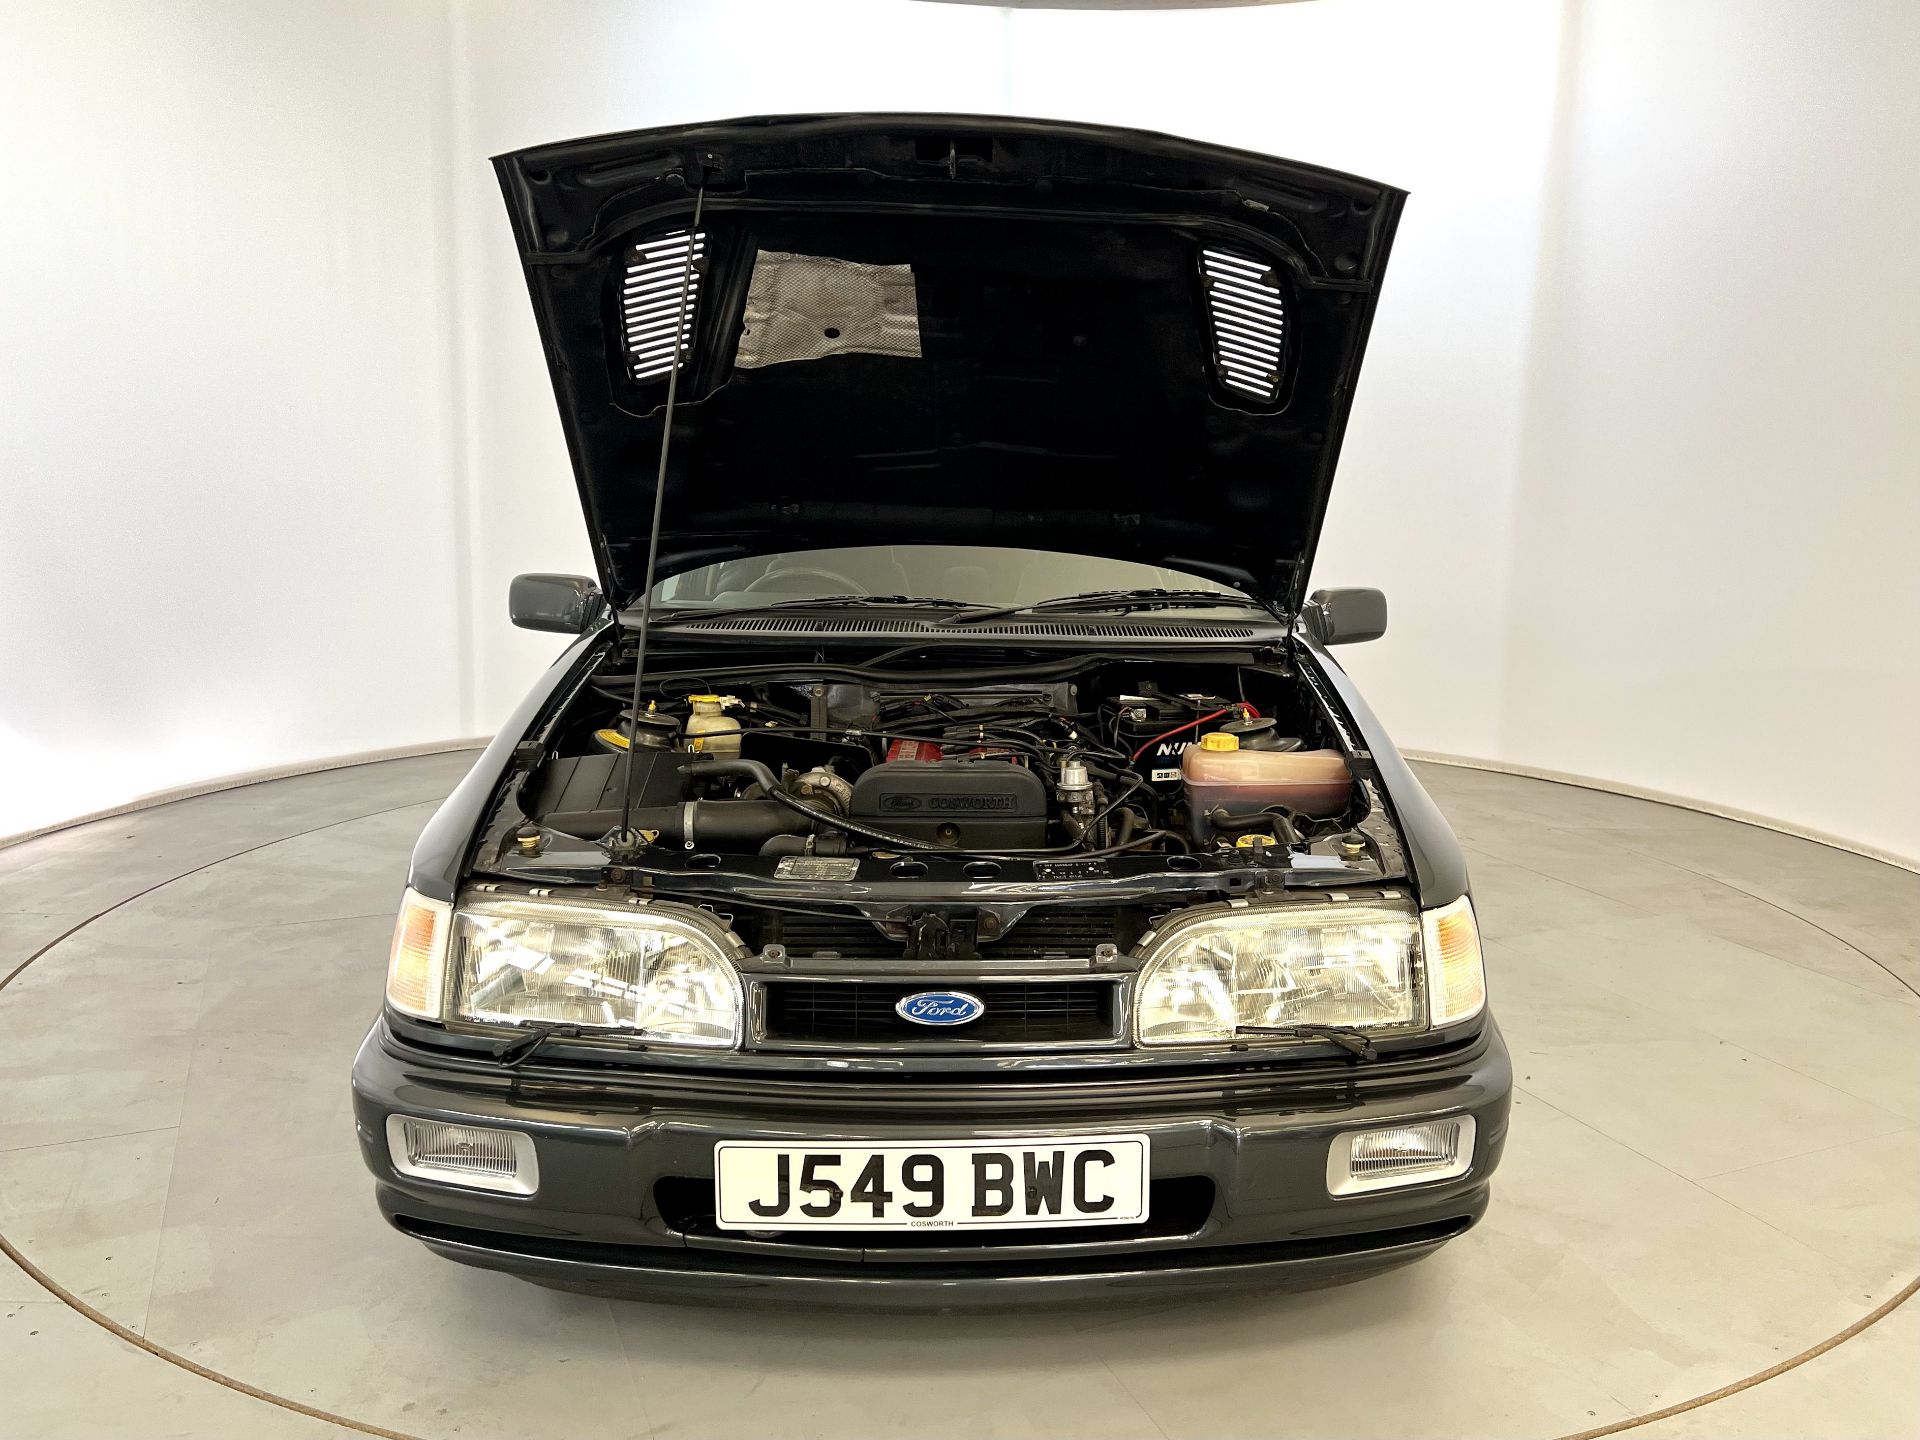 Ford Sierra Sapphire Cosworth - Image 35 of 37